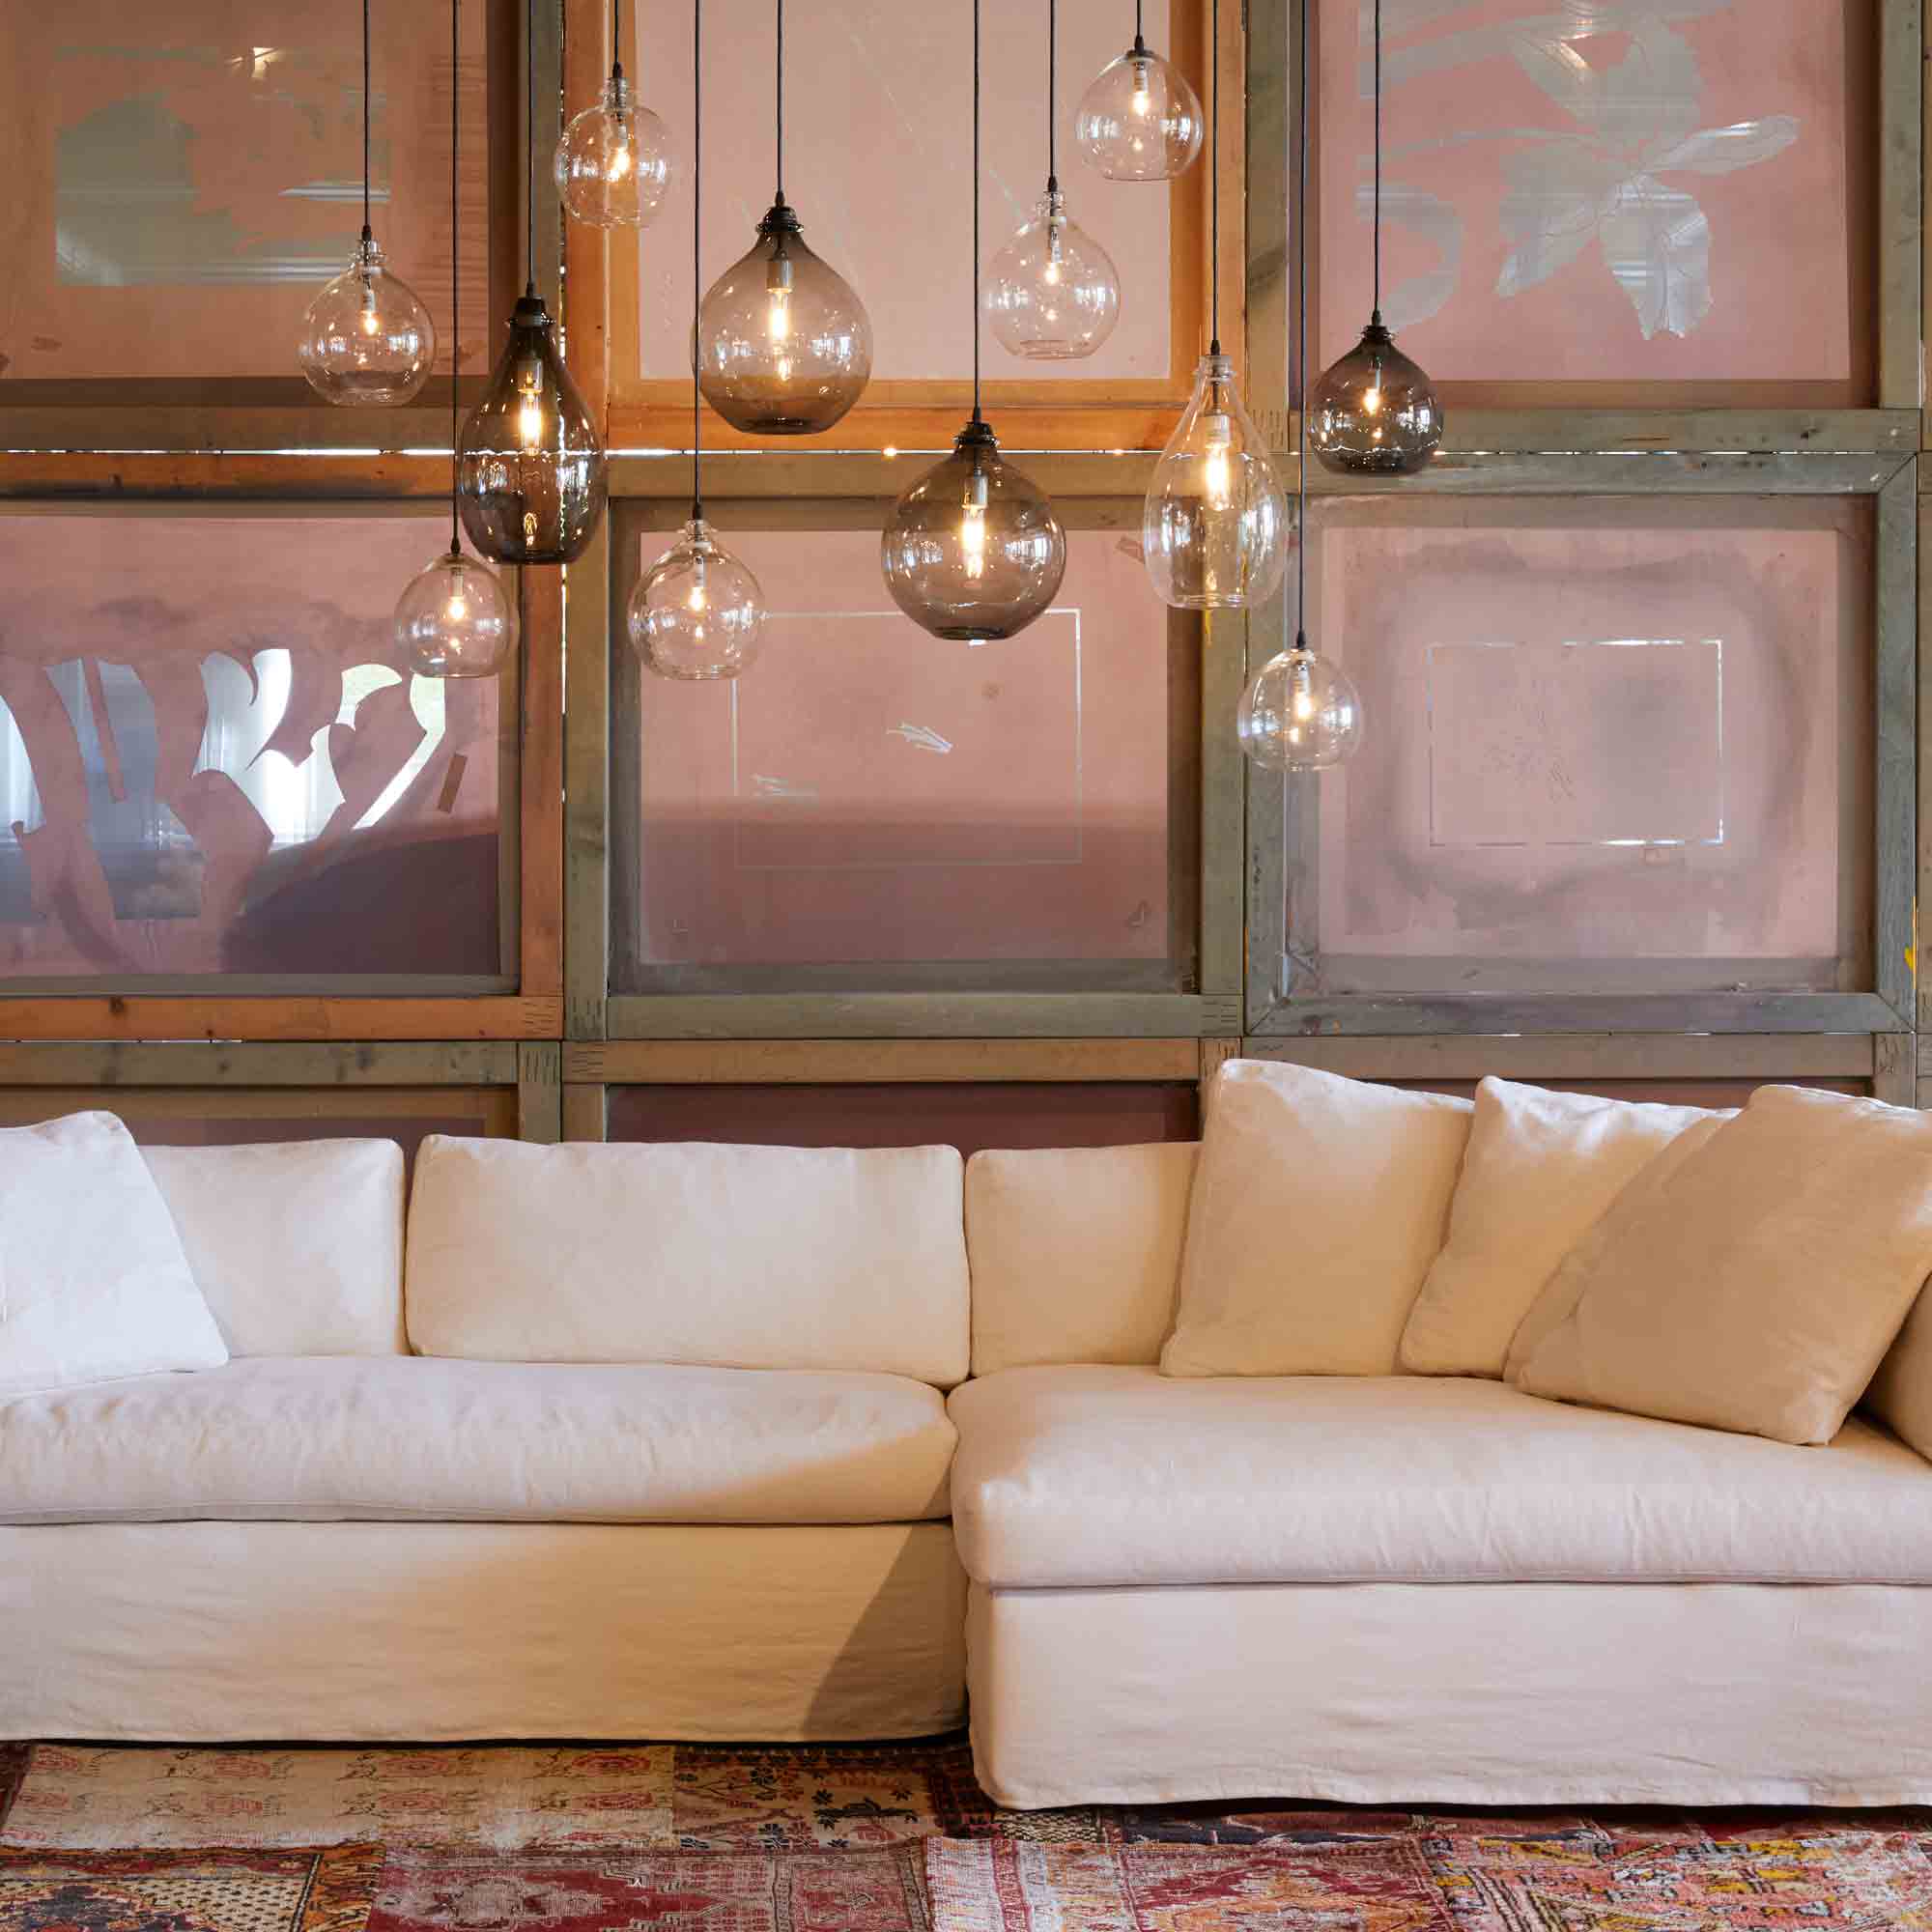  Slipcovered sectional in light neutral fabric with combination of jug pendants hanging above in clear and smoke finish. Repurposed silk screens used as a background wall.  